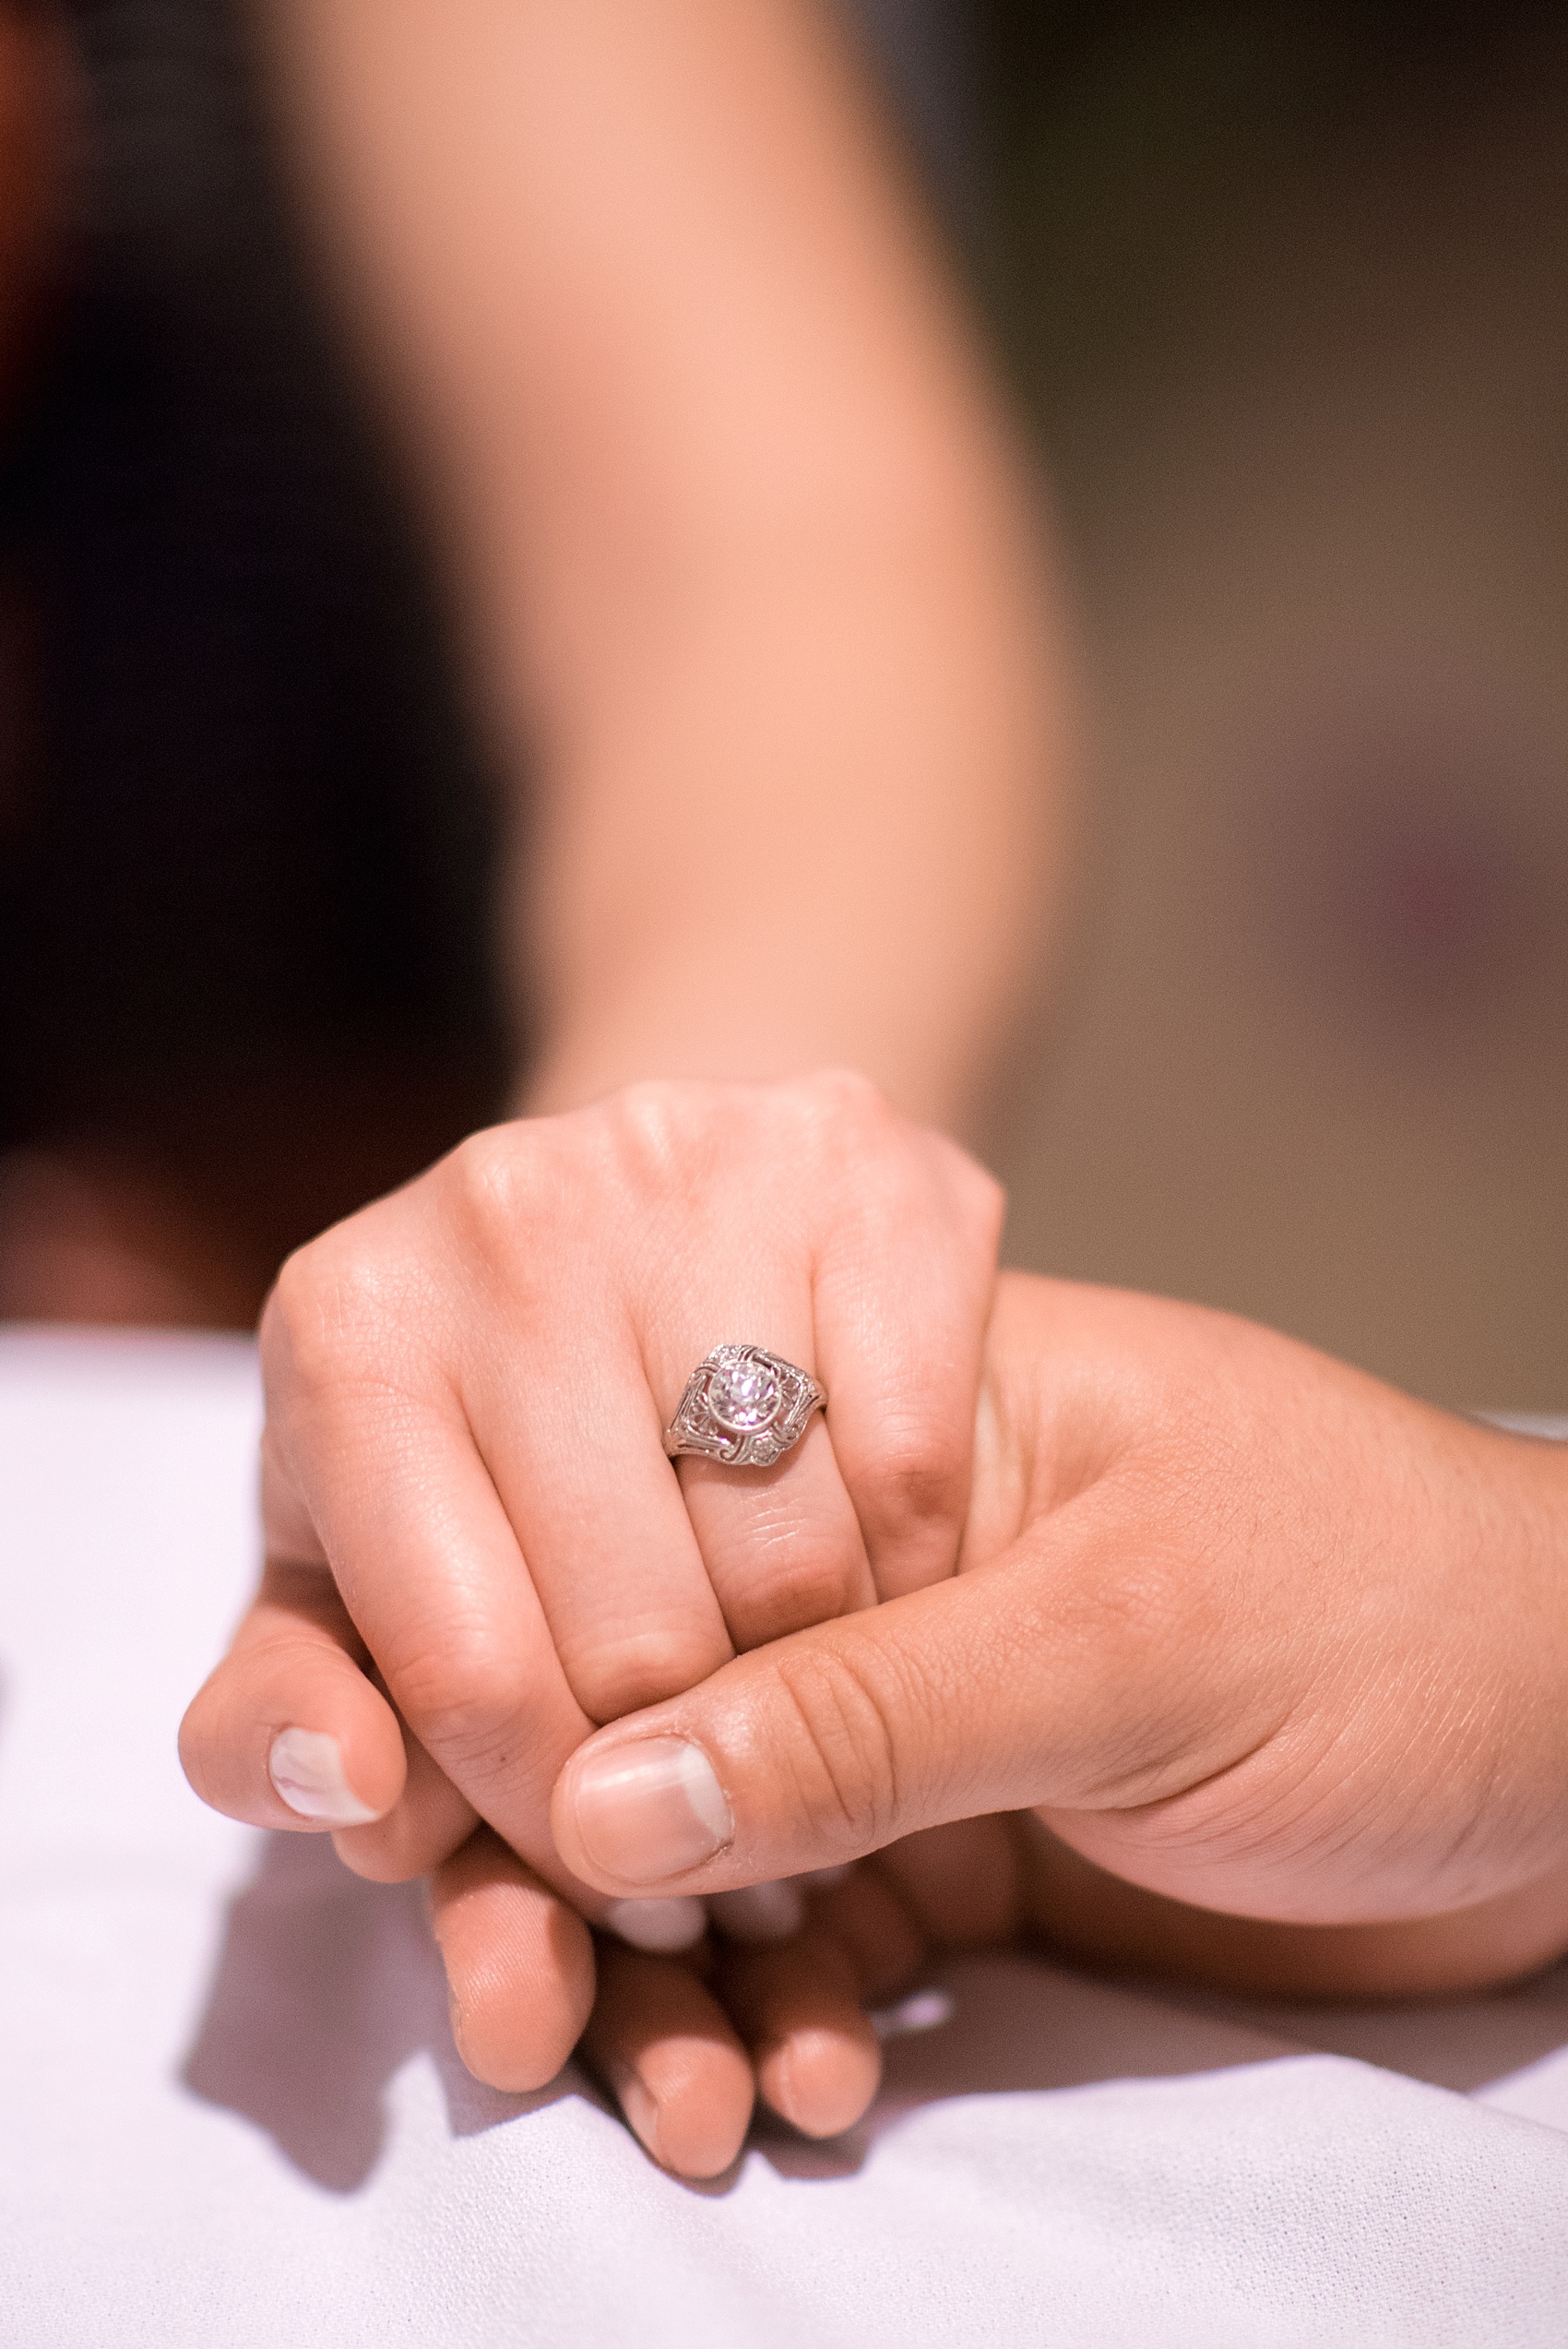 Vintage antique white gold diamond engagement ring. St. Lucia Proposal ideas - beachside romance at an oceanfront dinner at The Landings resort.  Photos by destination wedding photographer Mikkel Paige Photography.